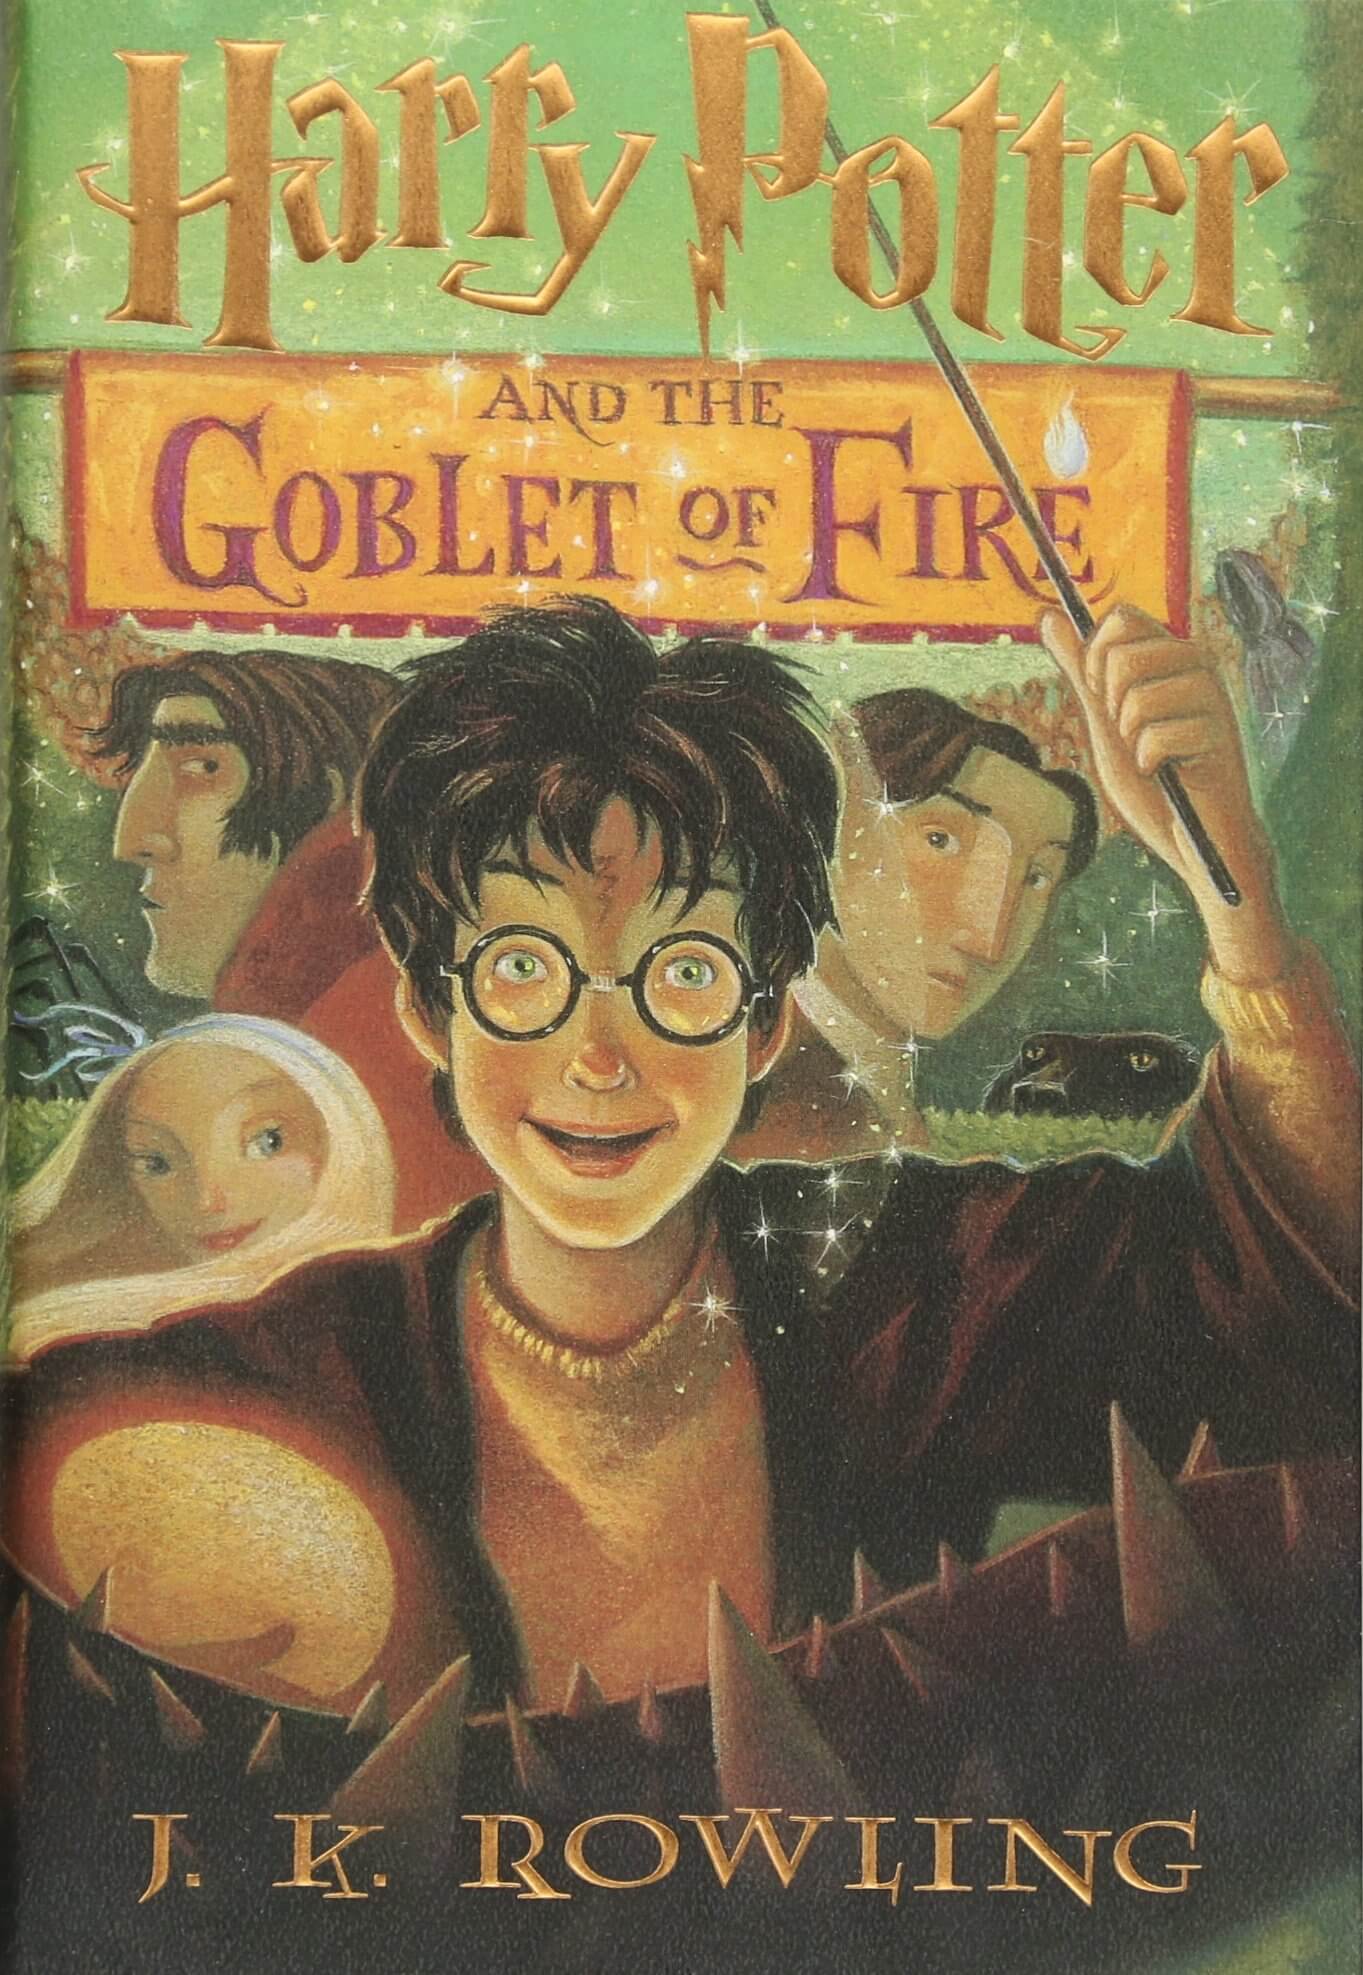 "Harry Potter and The Goblet of Fire"